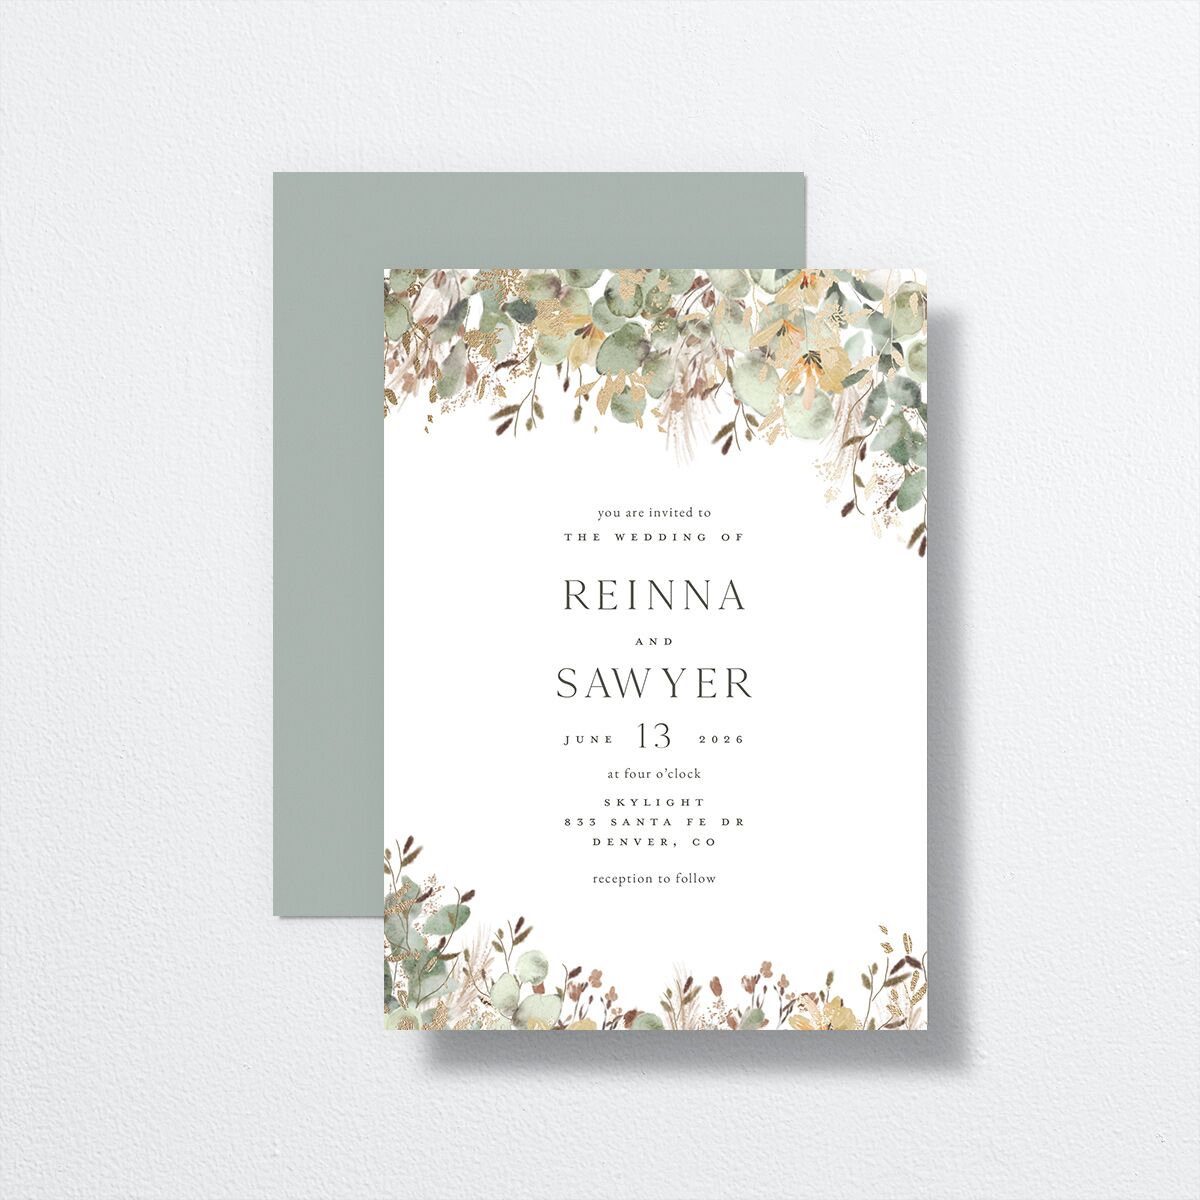 Eucalyptus Edges Wedding Invitations front-and-back in white